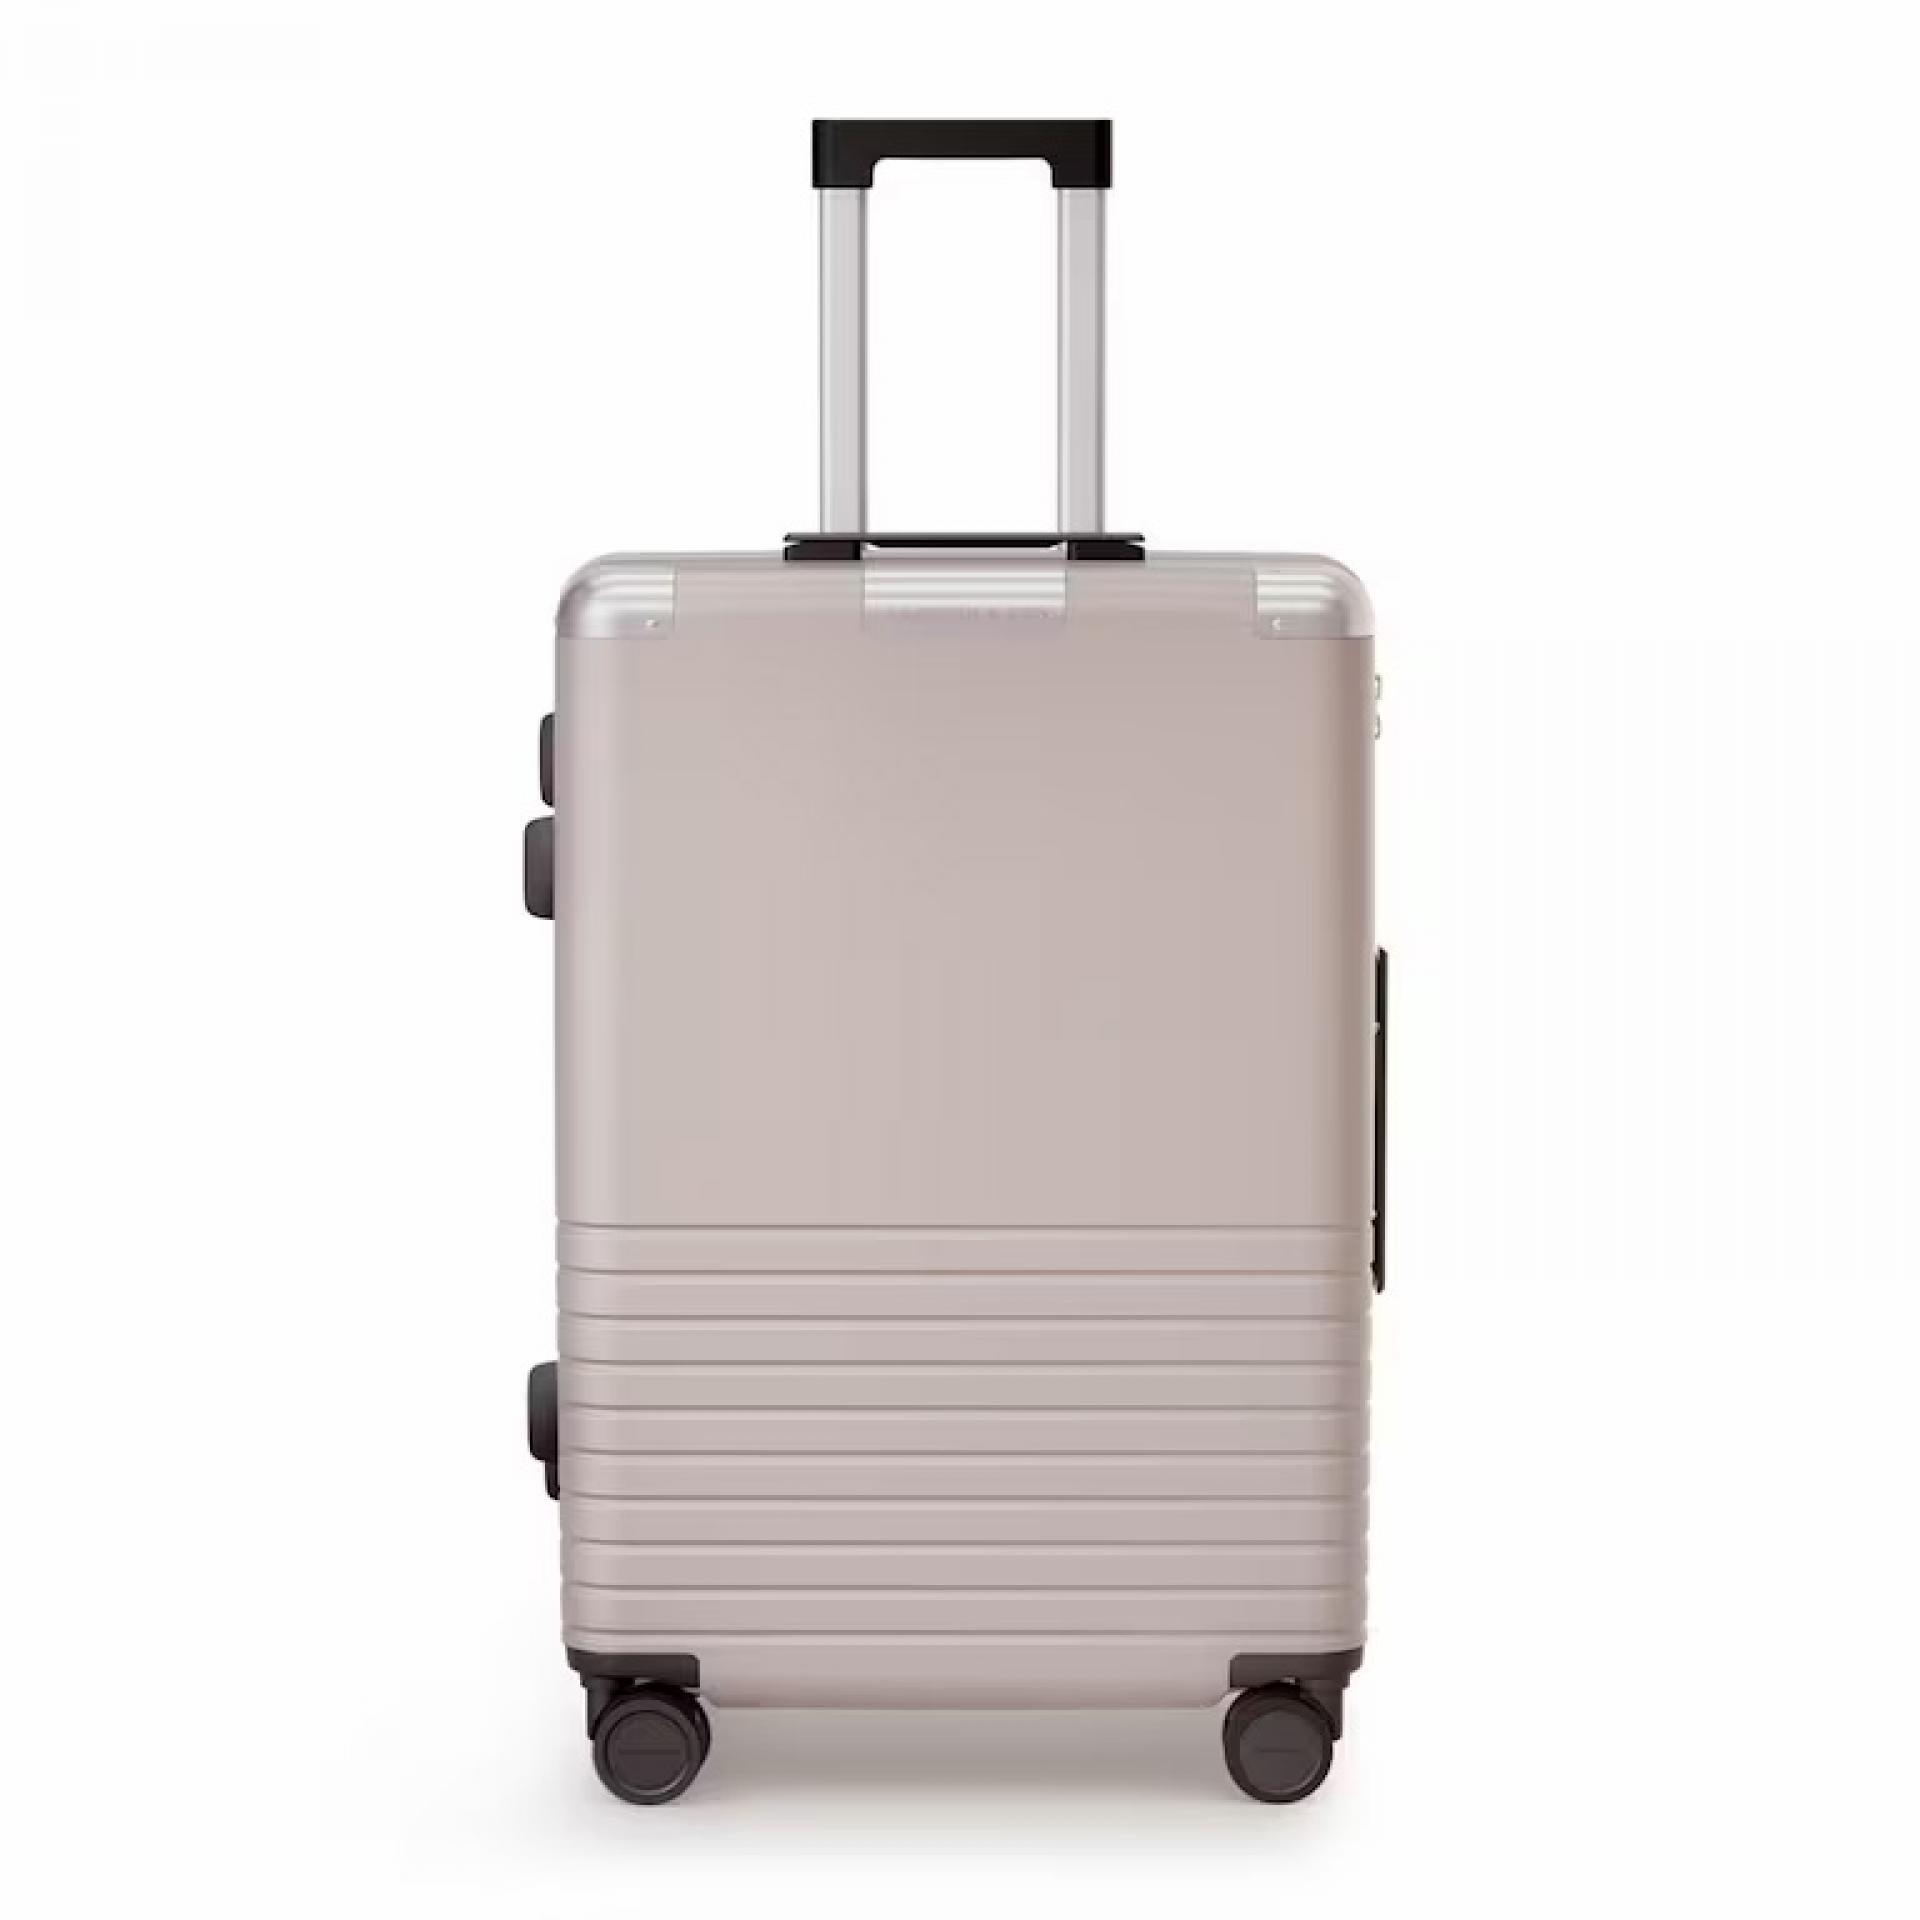 Kapten & Son Luggage Heathrow Check In Muted Clay